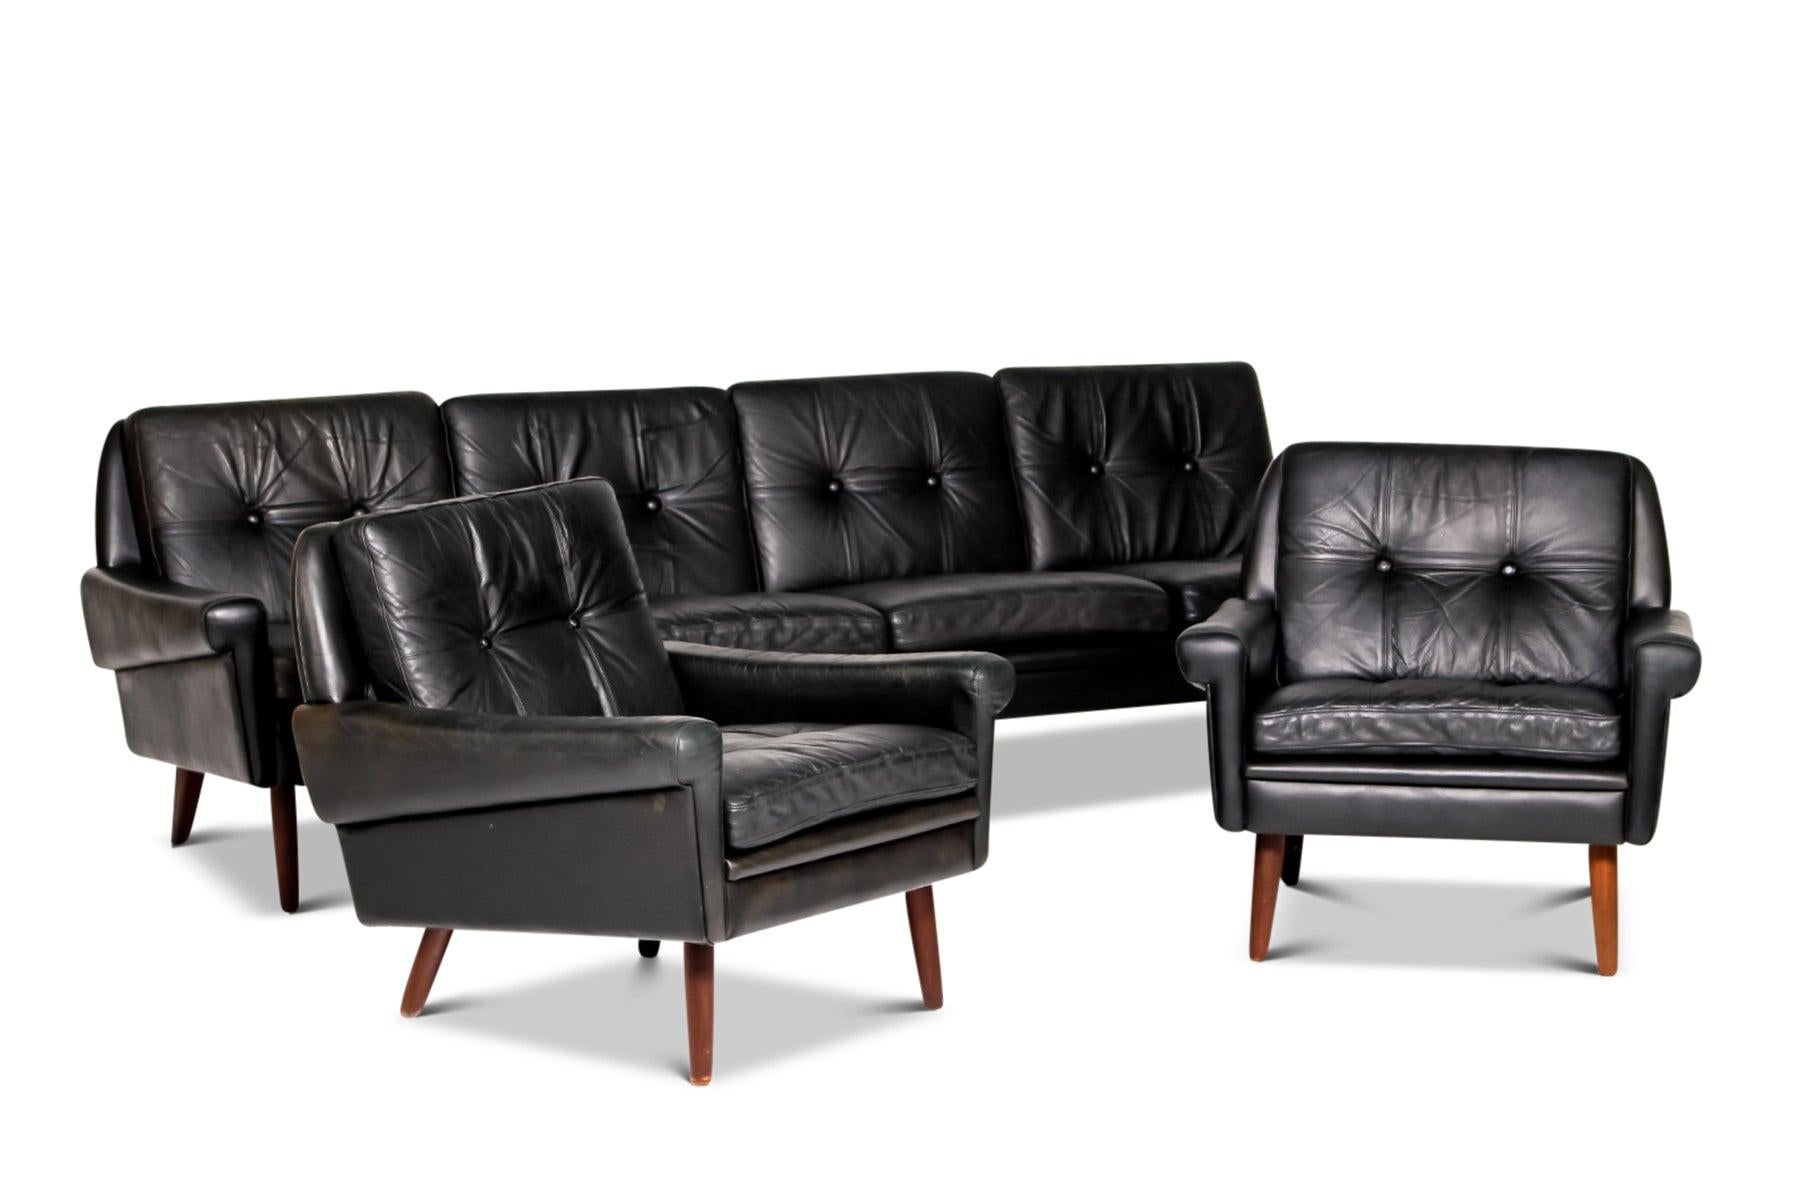 Danish Svend Skipper Four Seat Sofa in Black Leather + Pair of Matching Armchairs